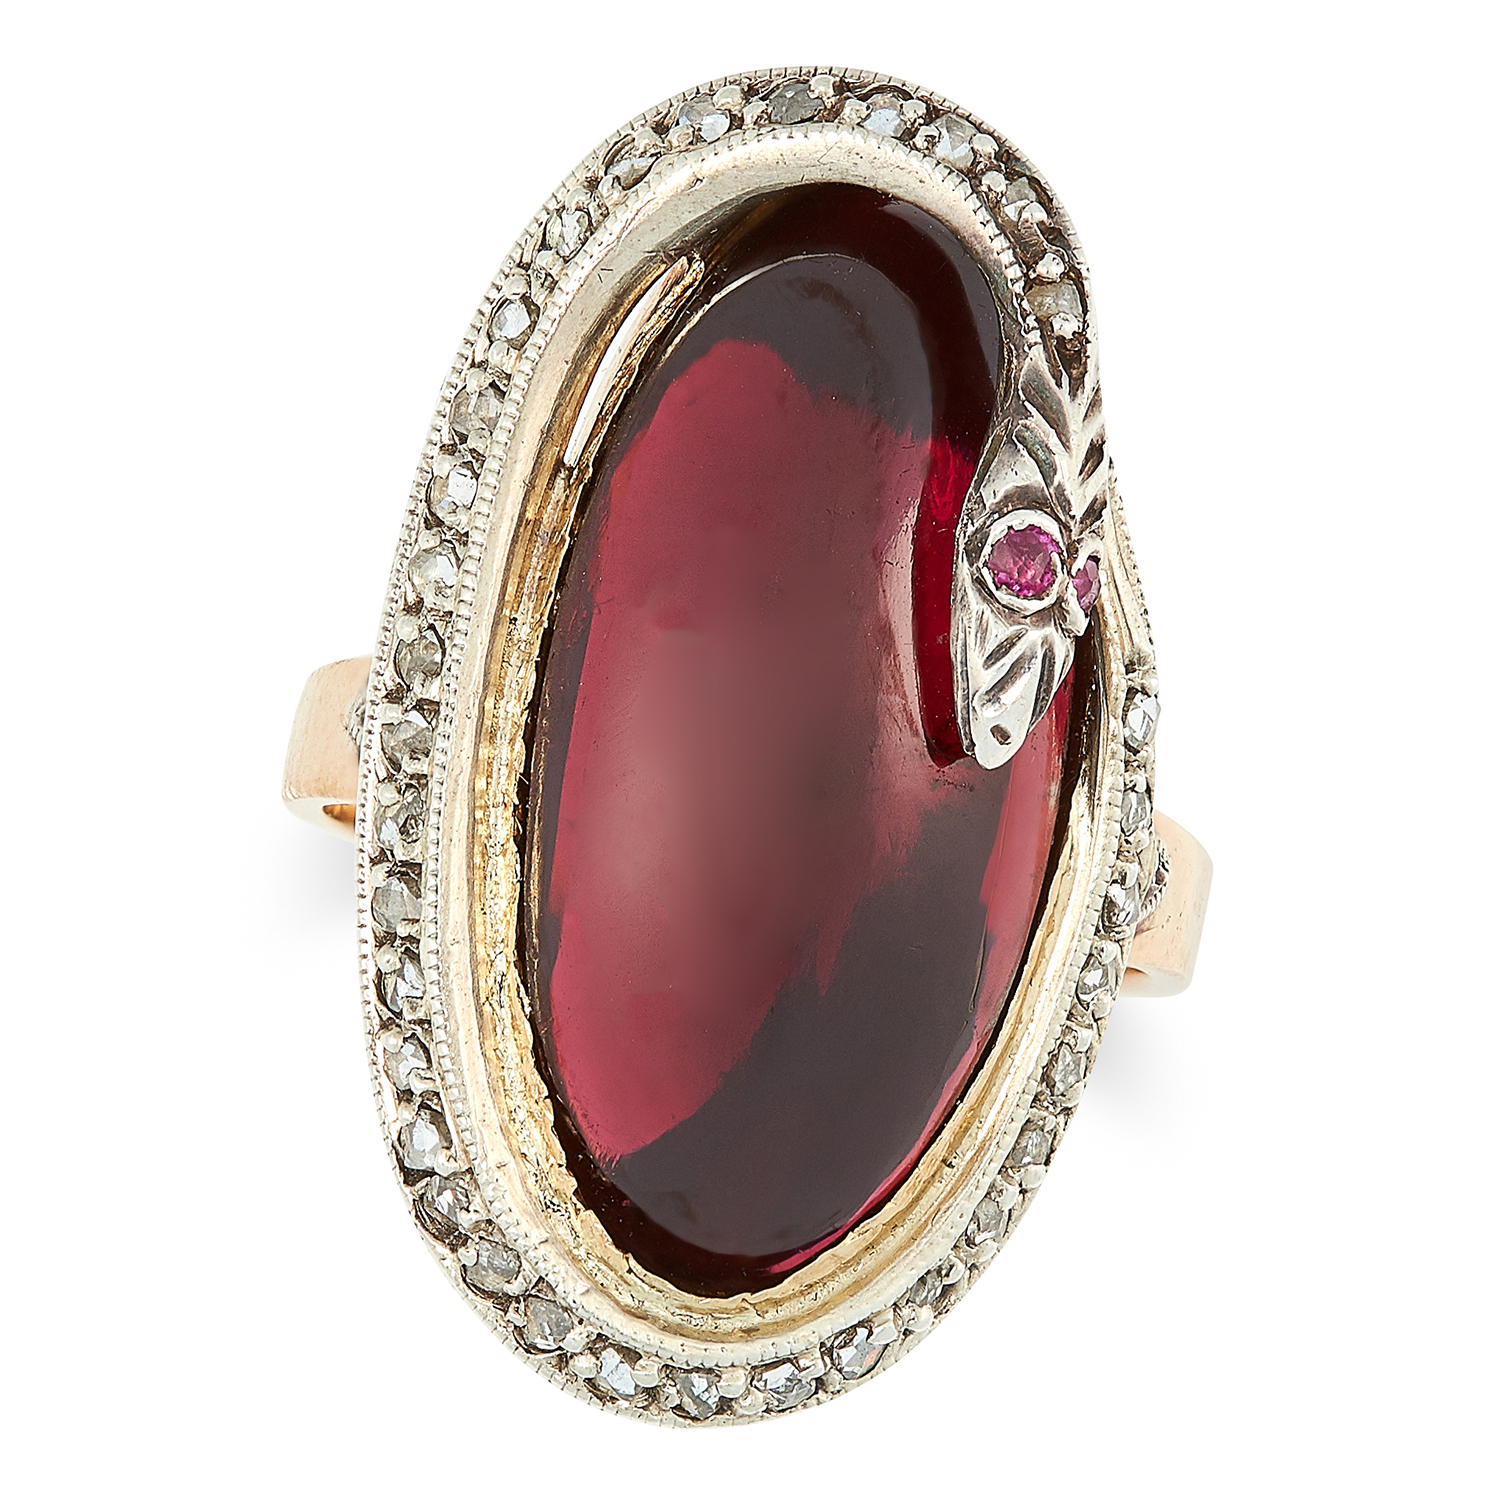 AN ANTIQUE GARNET AND DIAMOND SNAKE MOURNING RING, 19TH CENTURY set with a cabochon garnet in a